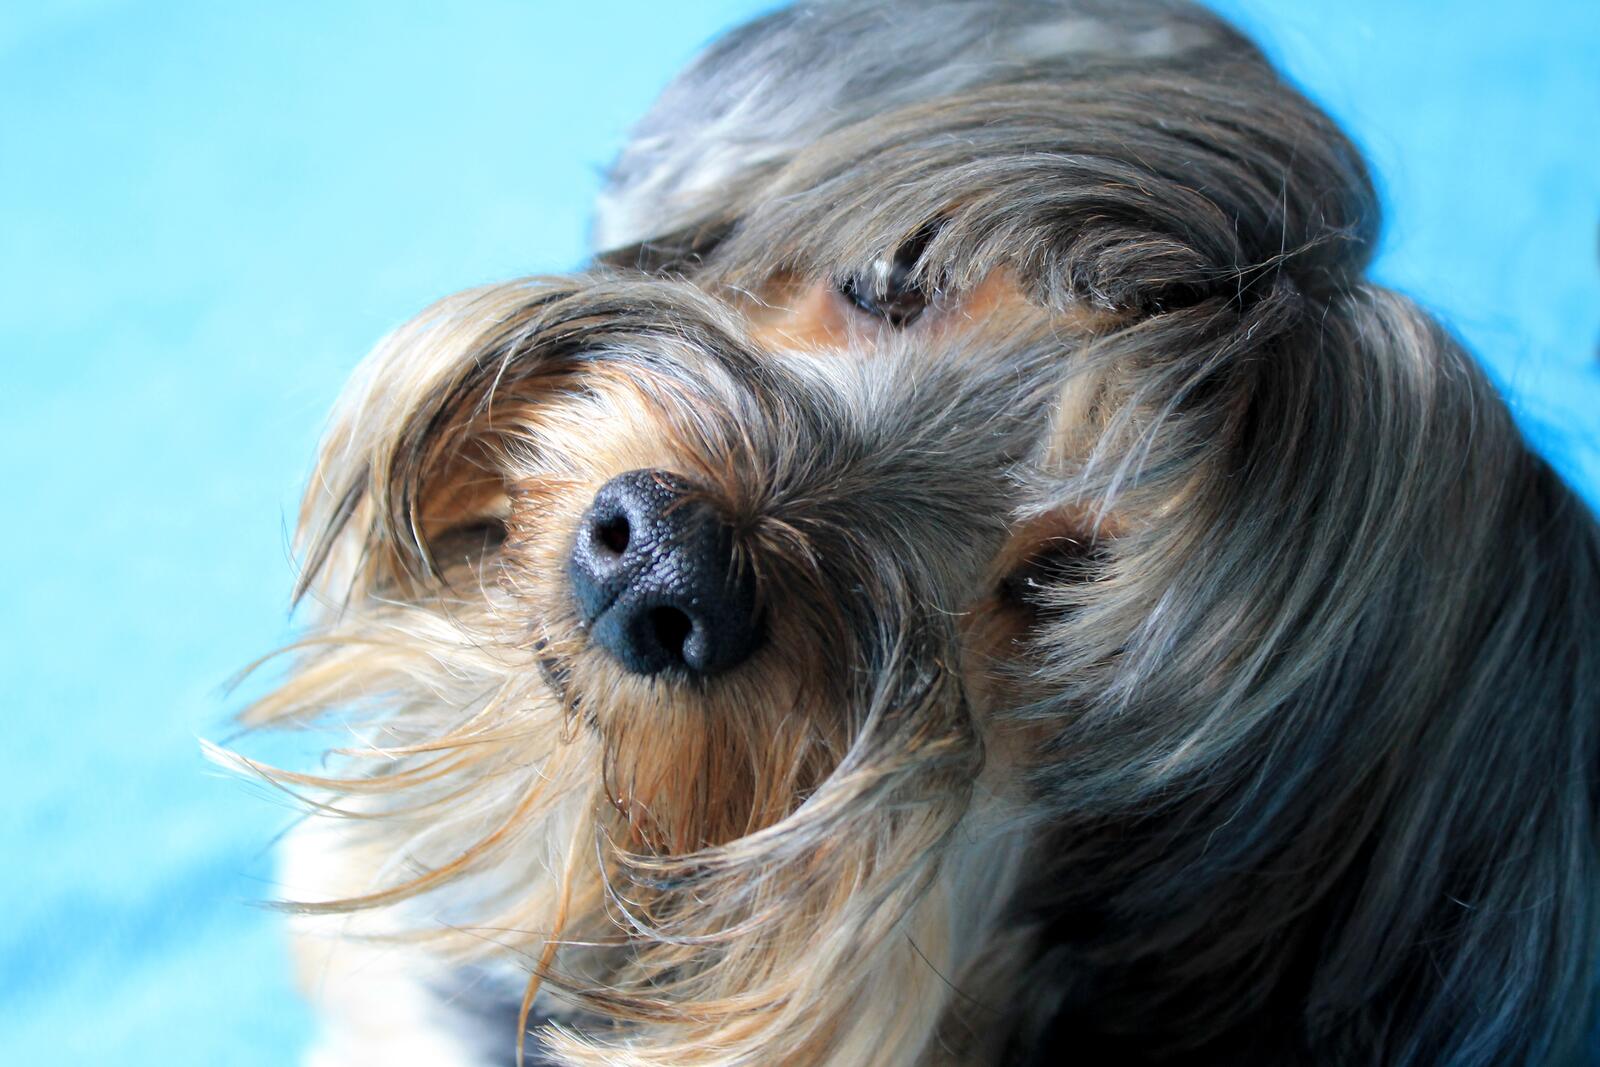 Free photo A Yorkshire terrier looks at the photographer